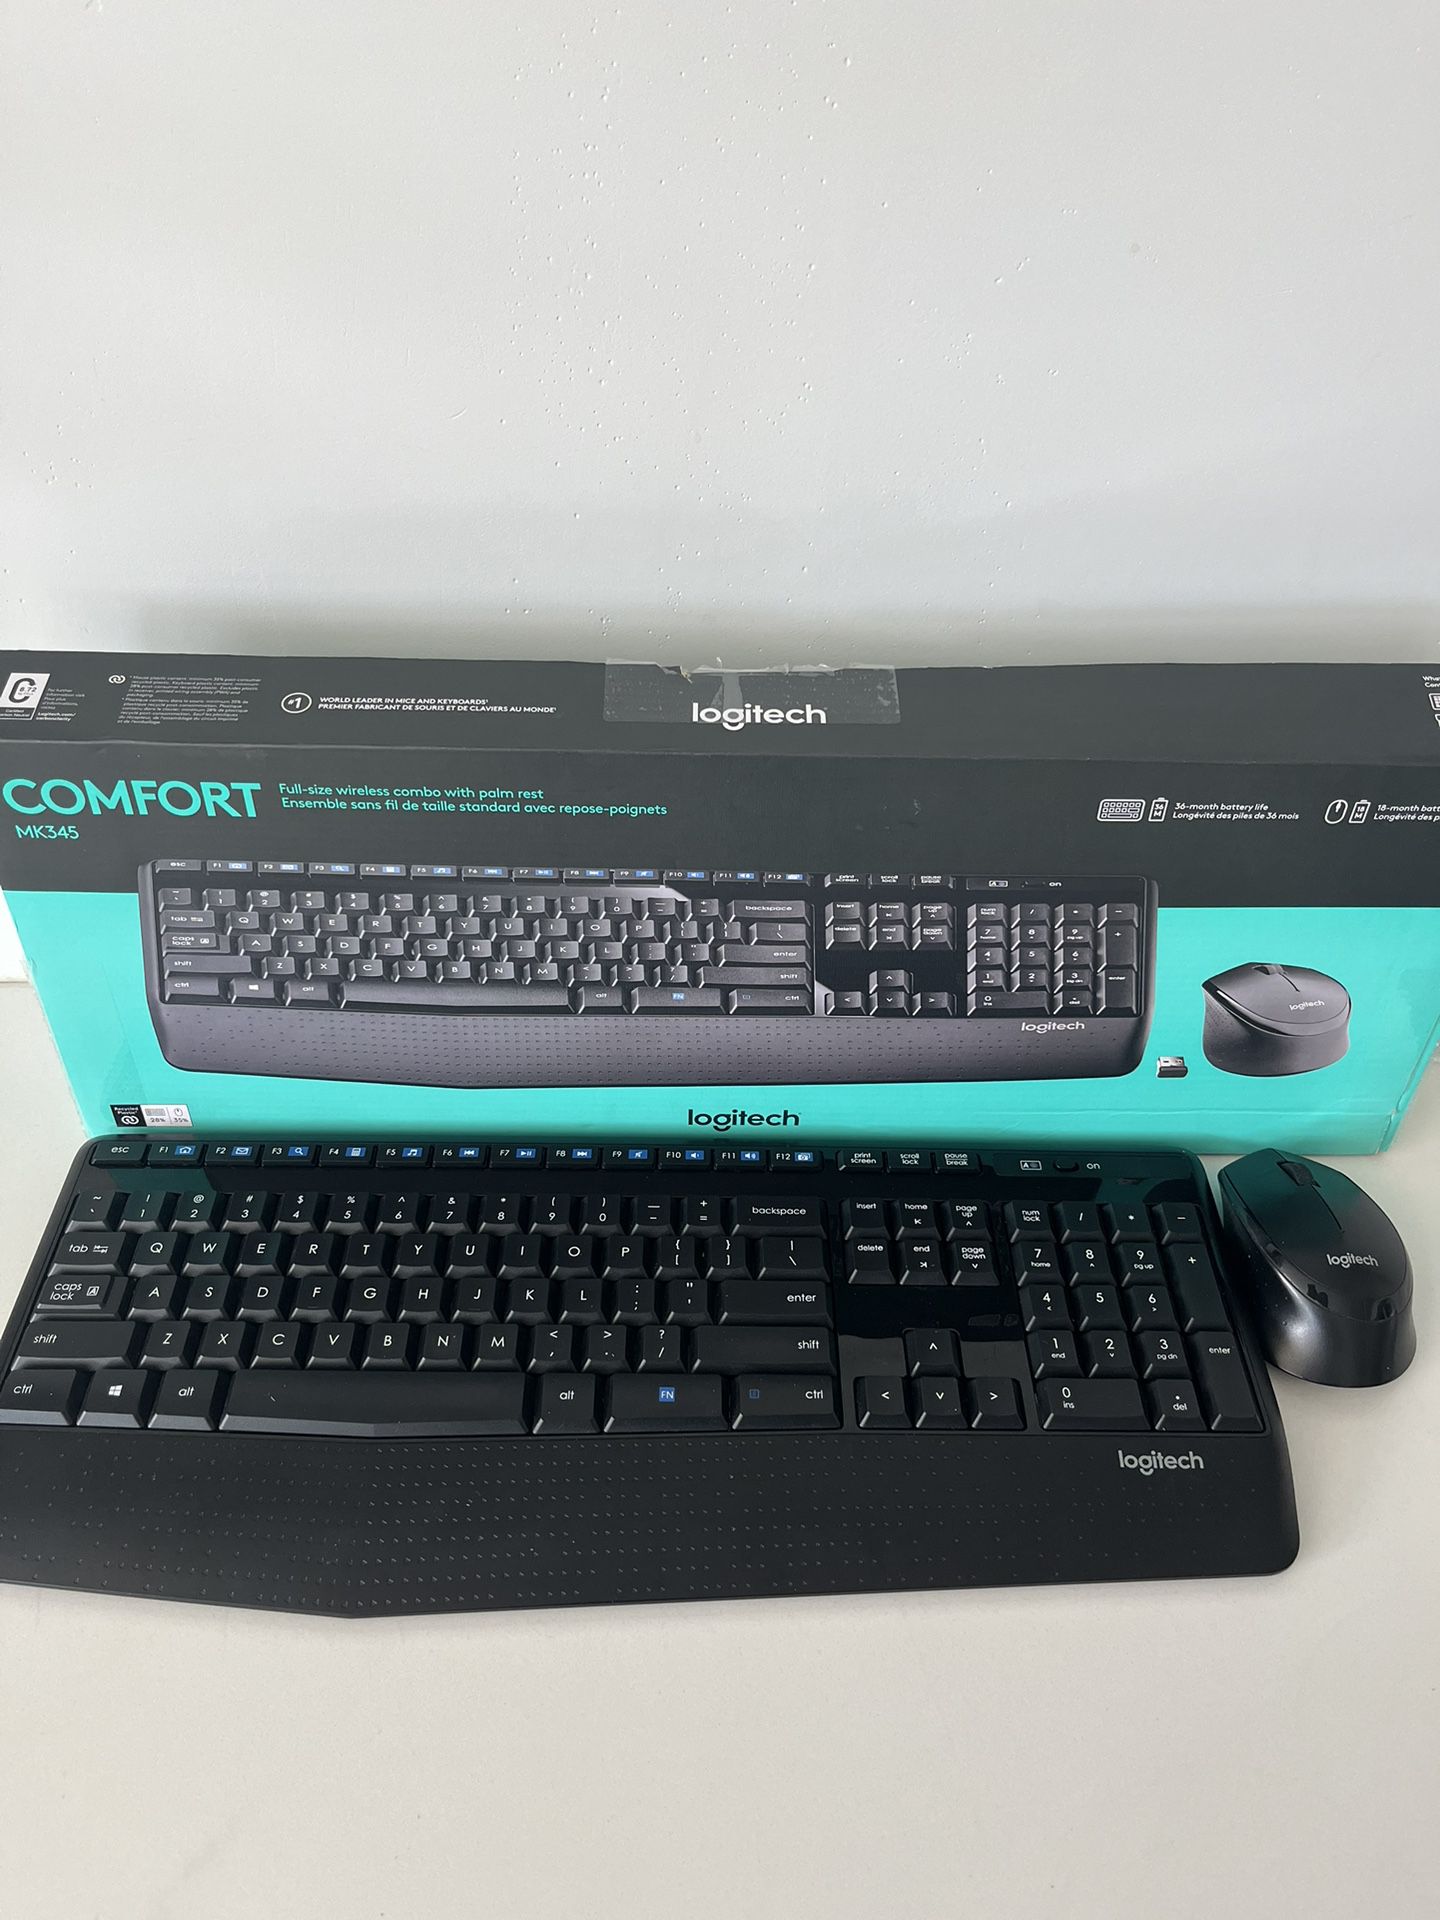 Logitech MK345 Wireless Keyboard and Mouse Combo - Excellent Condition! 